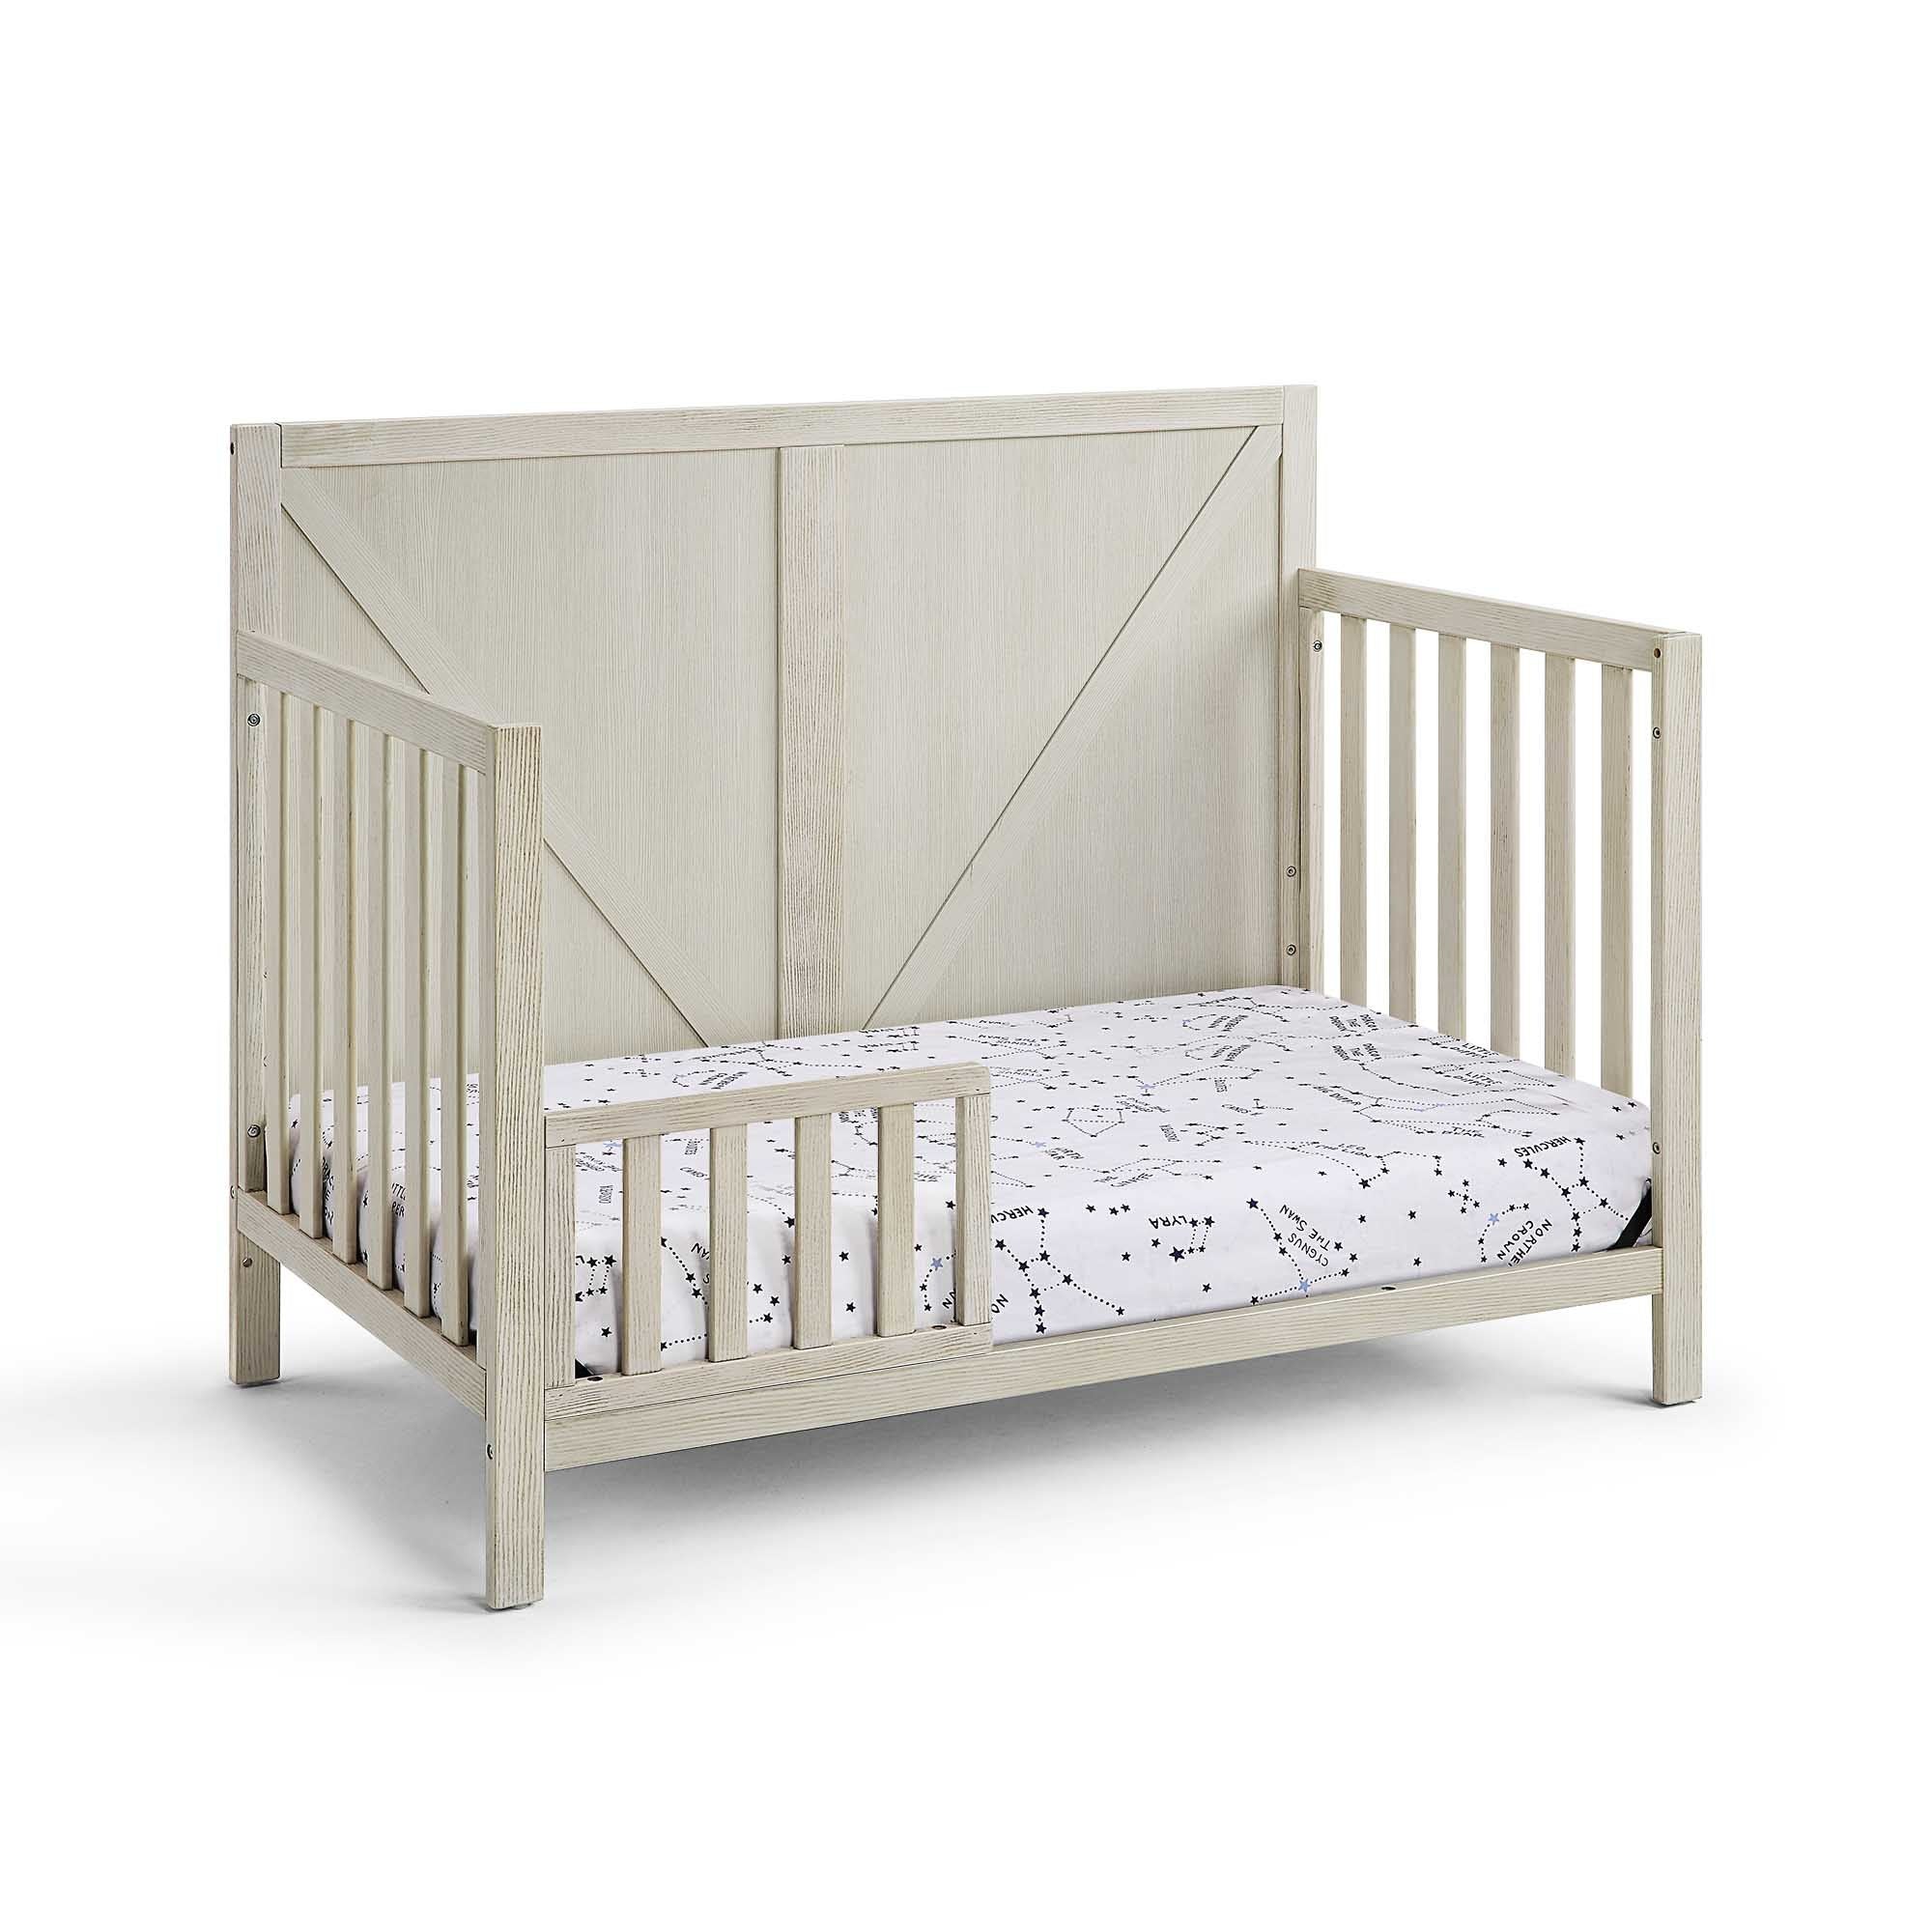 Barnside 4-in-1 Convertible Crib - Washed Gray - first step nursery